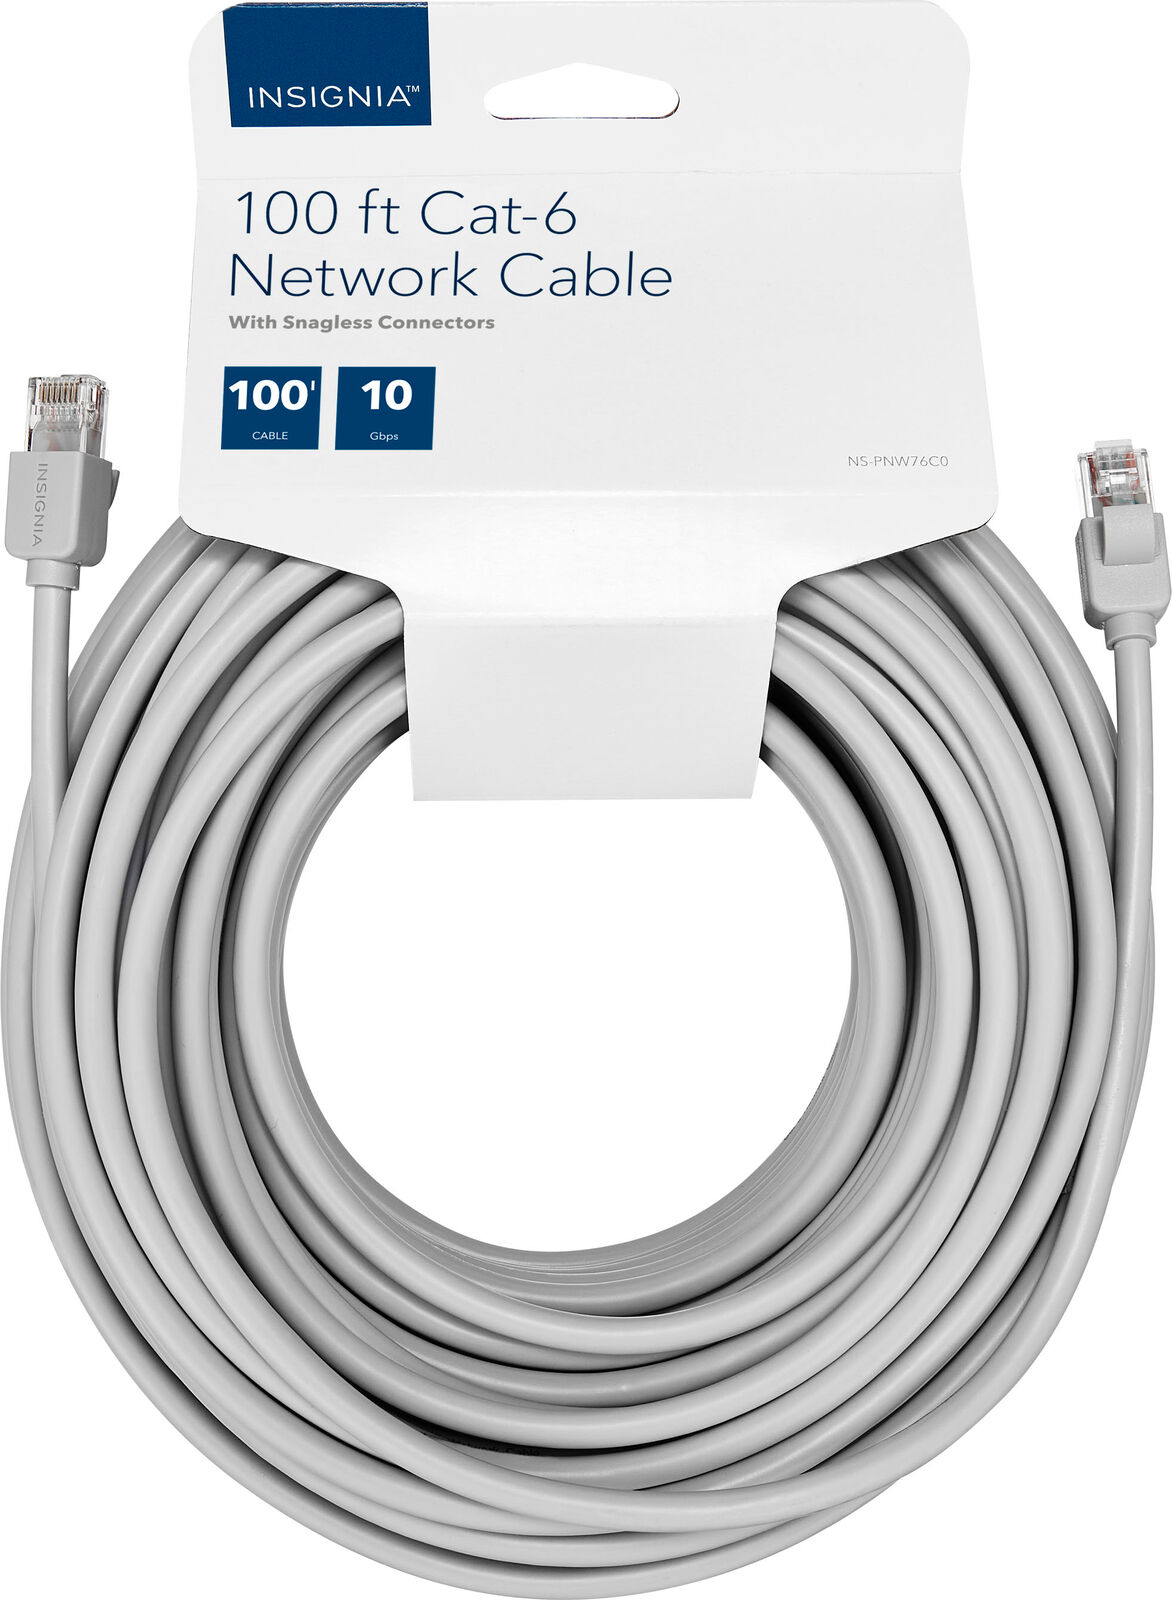 Insignia- 100' Cat-6 Ethernet Cable - Gray